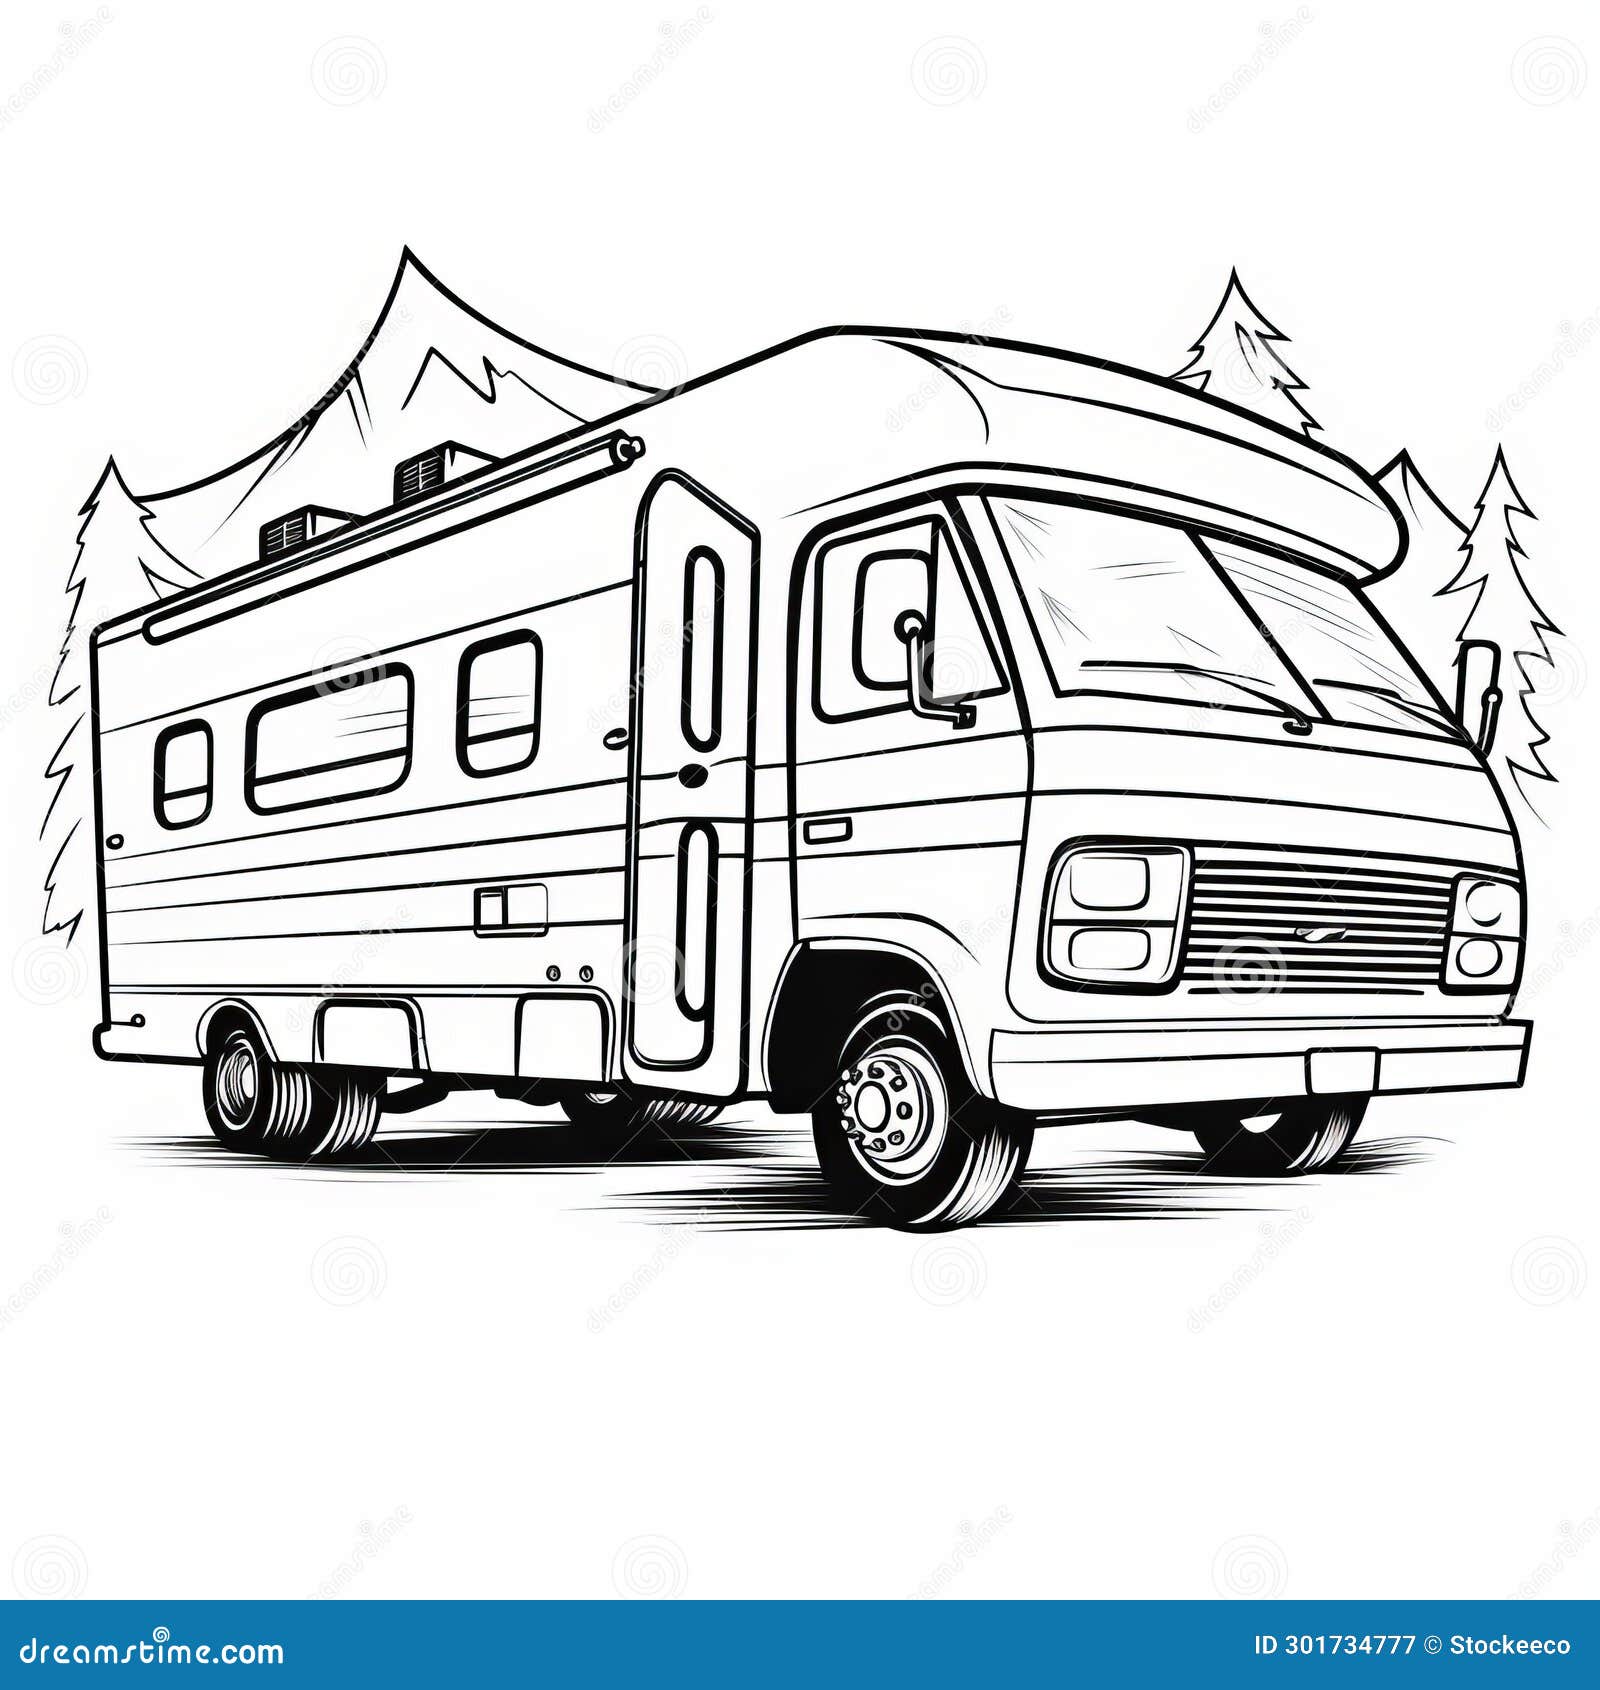 Rv coloring pages stock illustrations â rv coloring pages stock illustrations vectors clipart